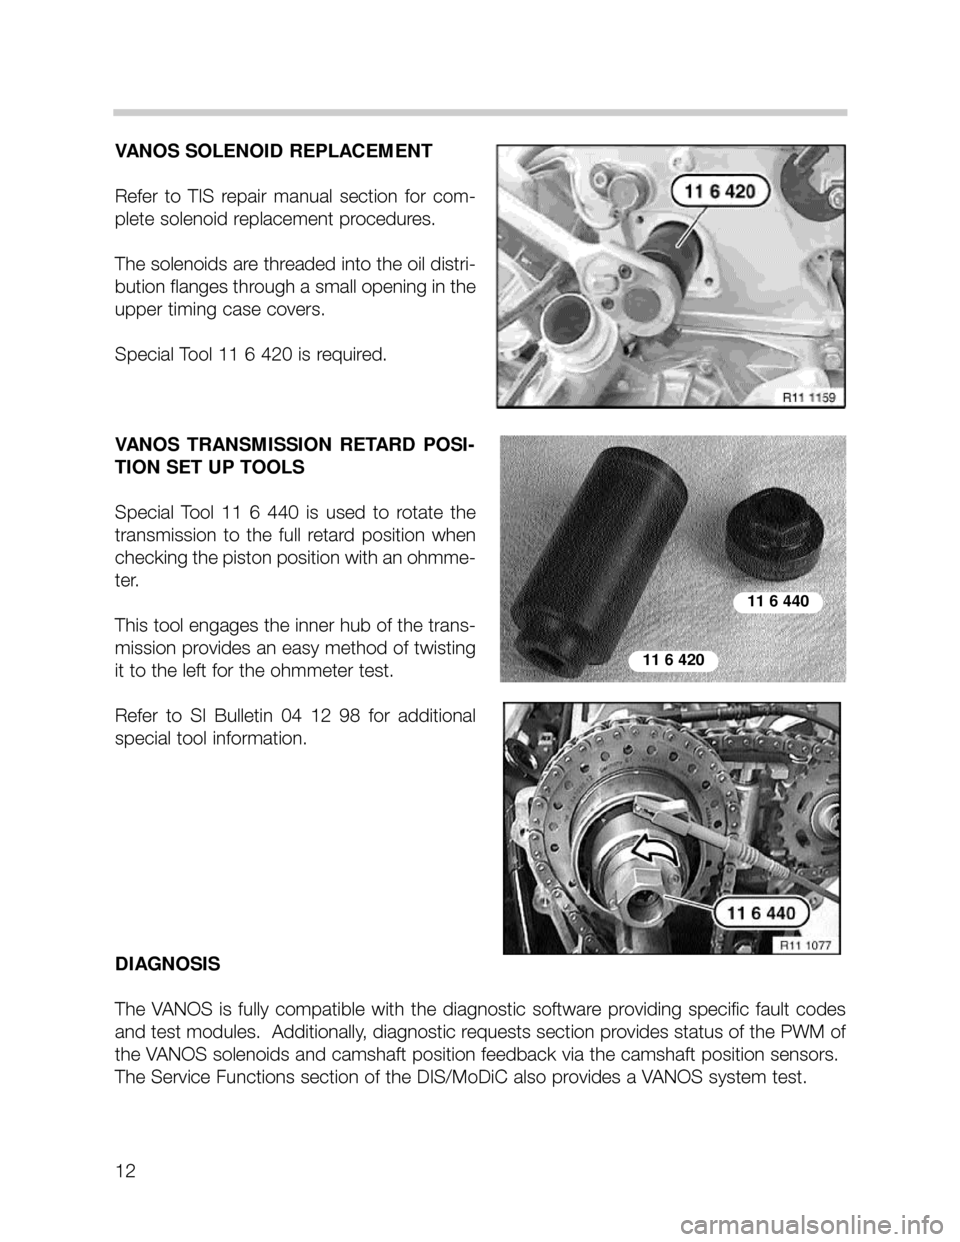 BMW 740i 1999 E38 M62TU Engine Workshop Manual 12
VANOS SOLENOID REPLACEMENT
Refer  to  TIS  repair  manual  section  for  com-
plete solenoid replacement procedures.  
The solenoids are threaded into the oil distri-
bution flanges through a small